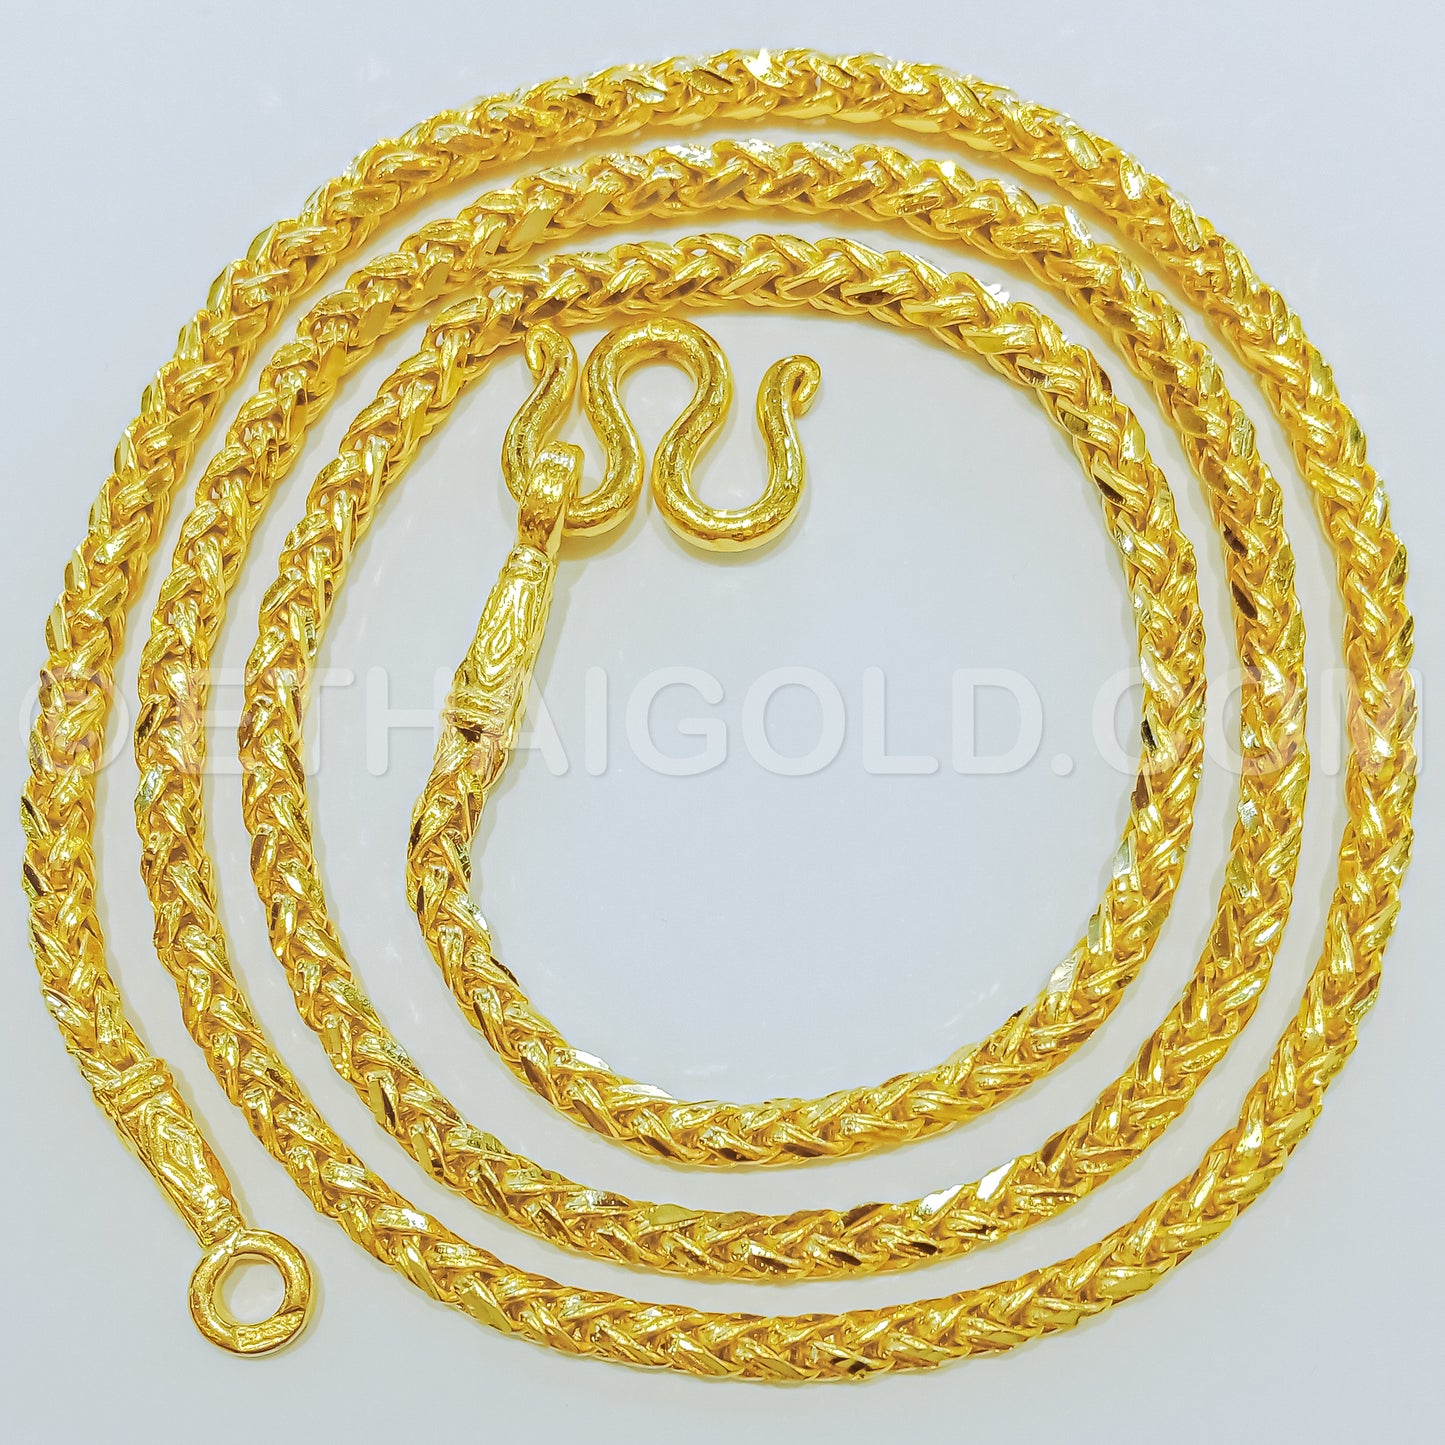 1 BAHT POLISHED DIAMOND-CUT SOLID PALMA CHAIN NECKLACE IN 23K GOLD (ID: N1501B)